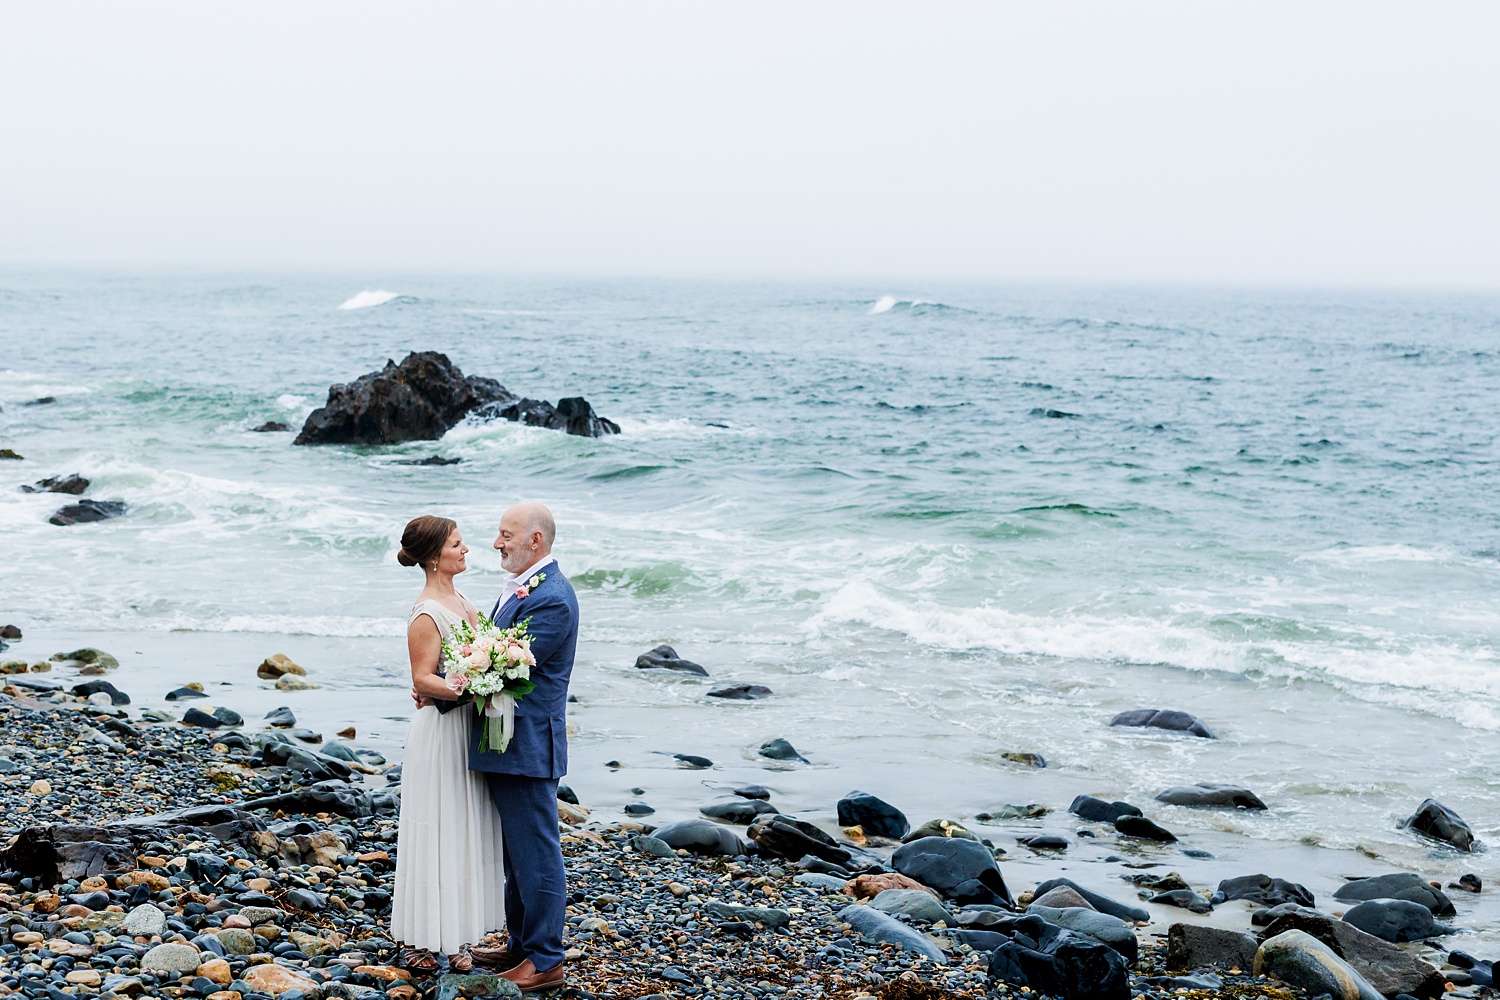 The newlyweds after their sunrise elopement on one of the beaches of Marginal Way Maine